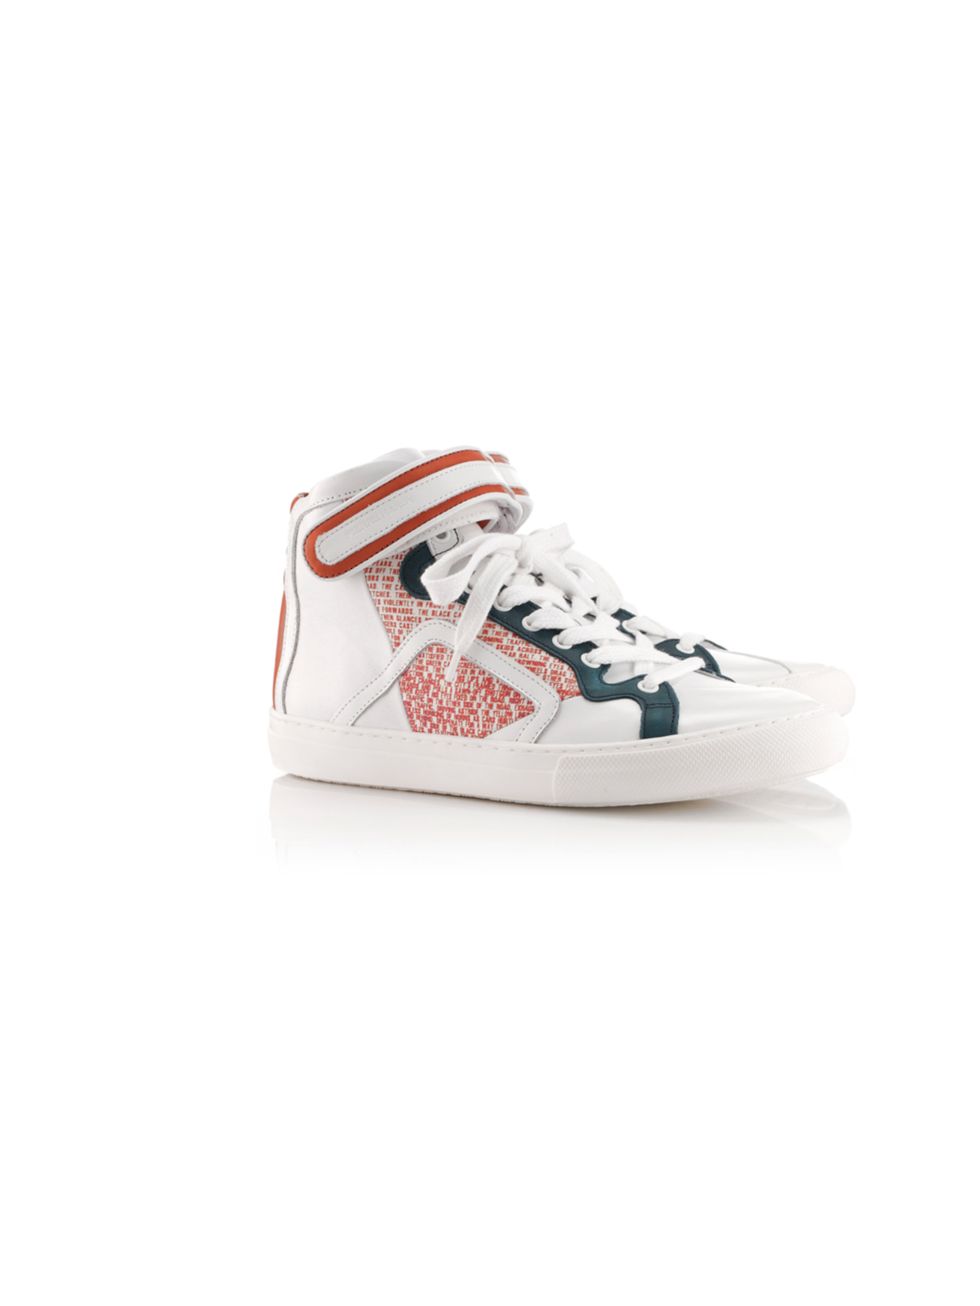 <p>Pierre Hardy for Mother of Pearl sneakers, £405, at <a href="http://www.avenue32.com/shoes/all-shoes/thymmus-orange-breakpoint-4102.html">Avenue 32</a></p>